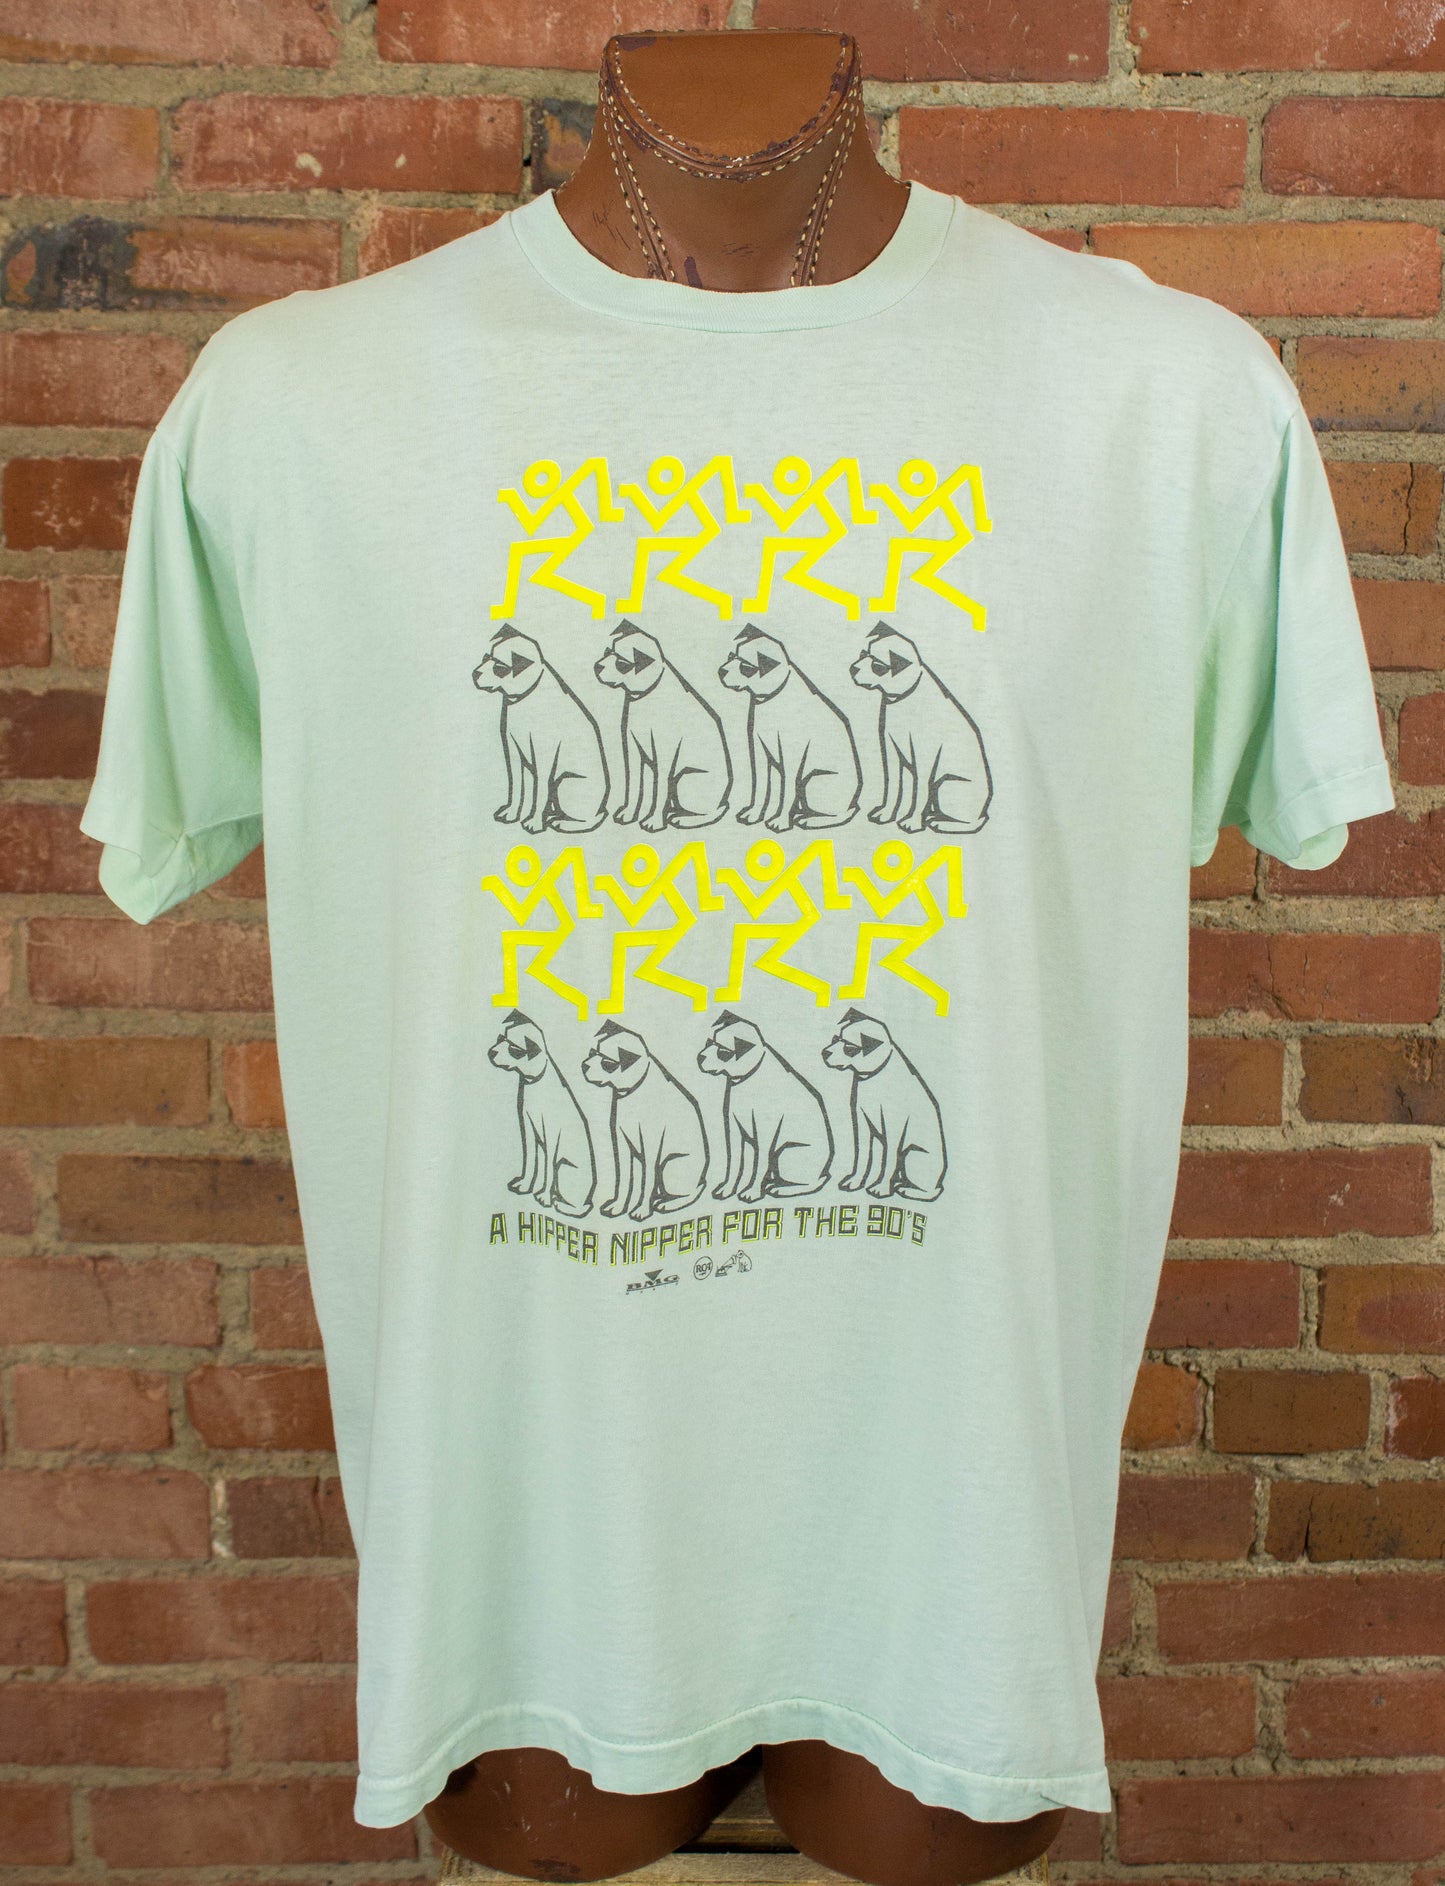 Vintage A Hipper Nipper For The 90s Graphic T Shirt 90s BMG RCA Victor Aqua and Highlighter Yellow XXL-3XL